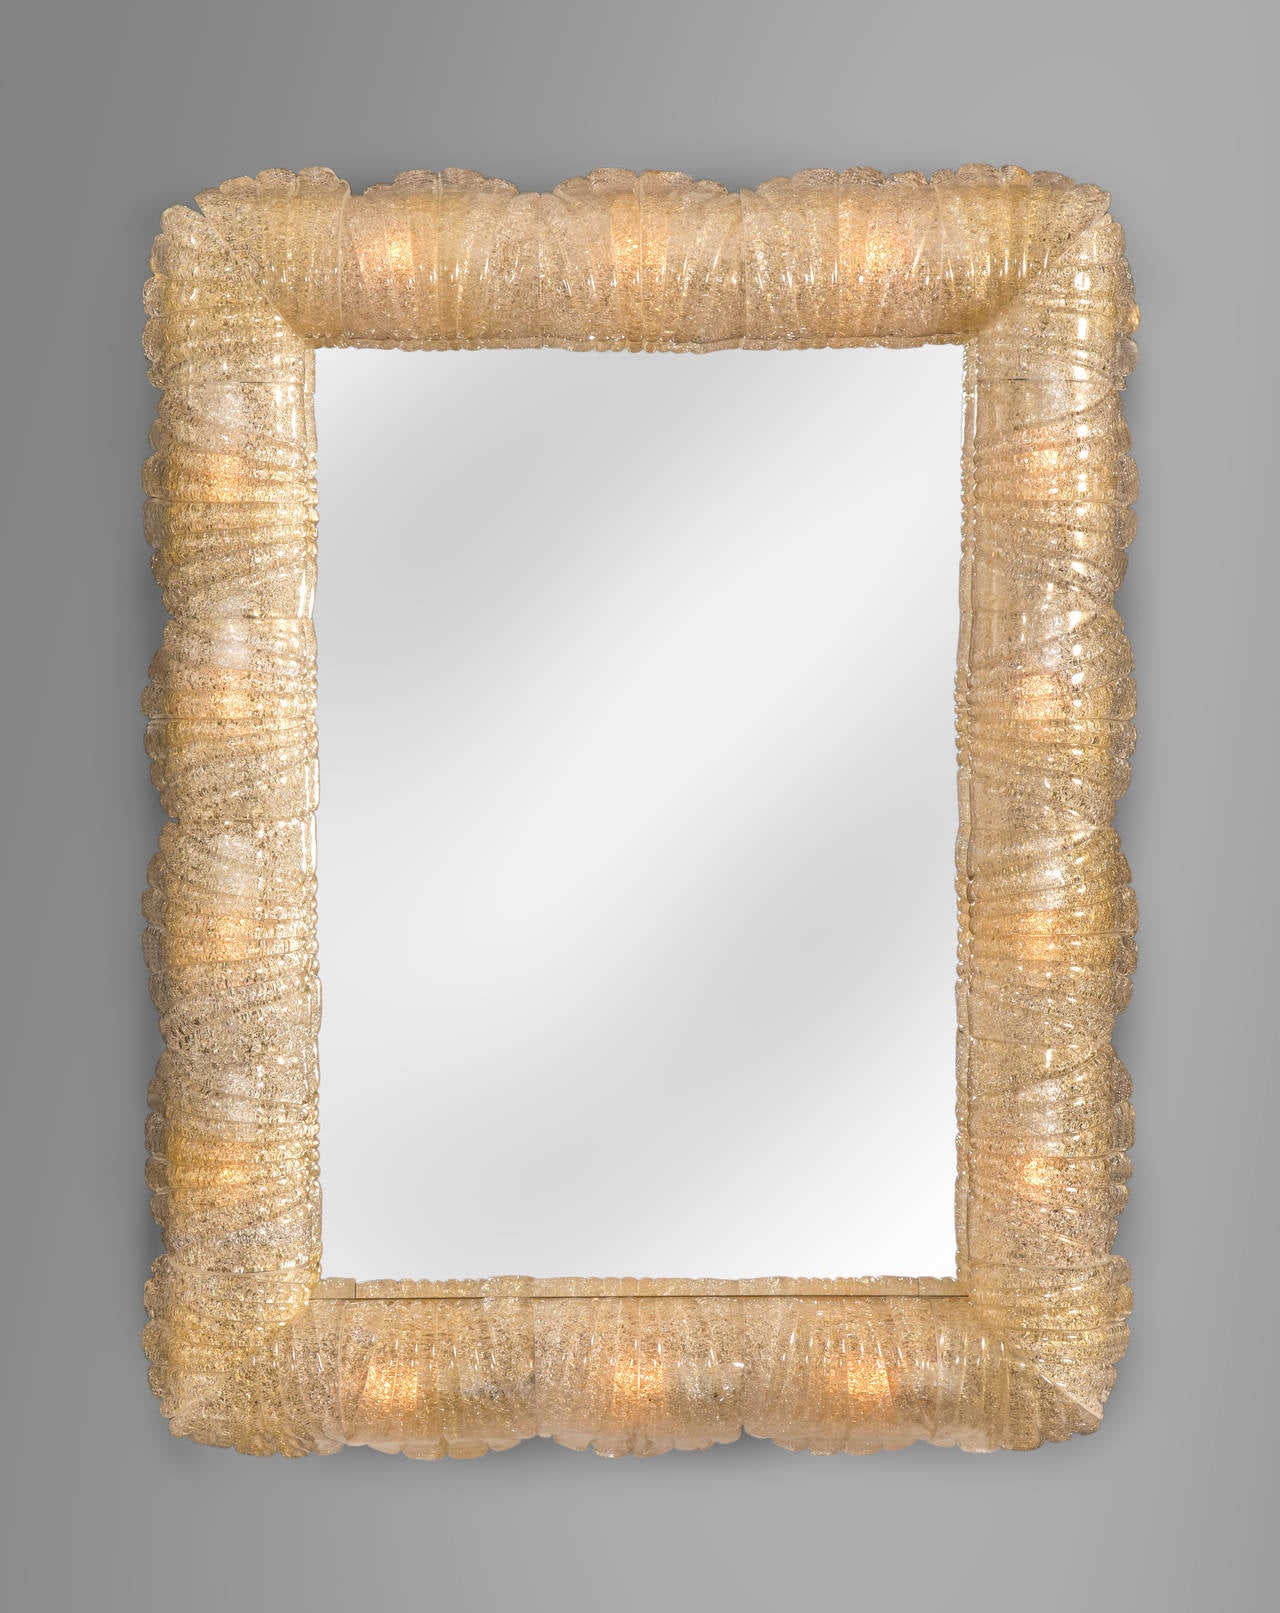 The magical Rugiadoso glass glows with a flattering light. The rectangular mirror plate inset in a brass border, within a frame composed of glass leaves with gold inclusions, softly illuminated by concealed lights.

One of two mirrors available.